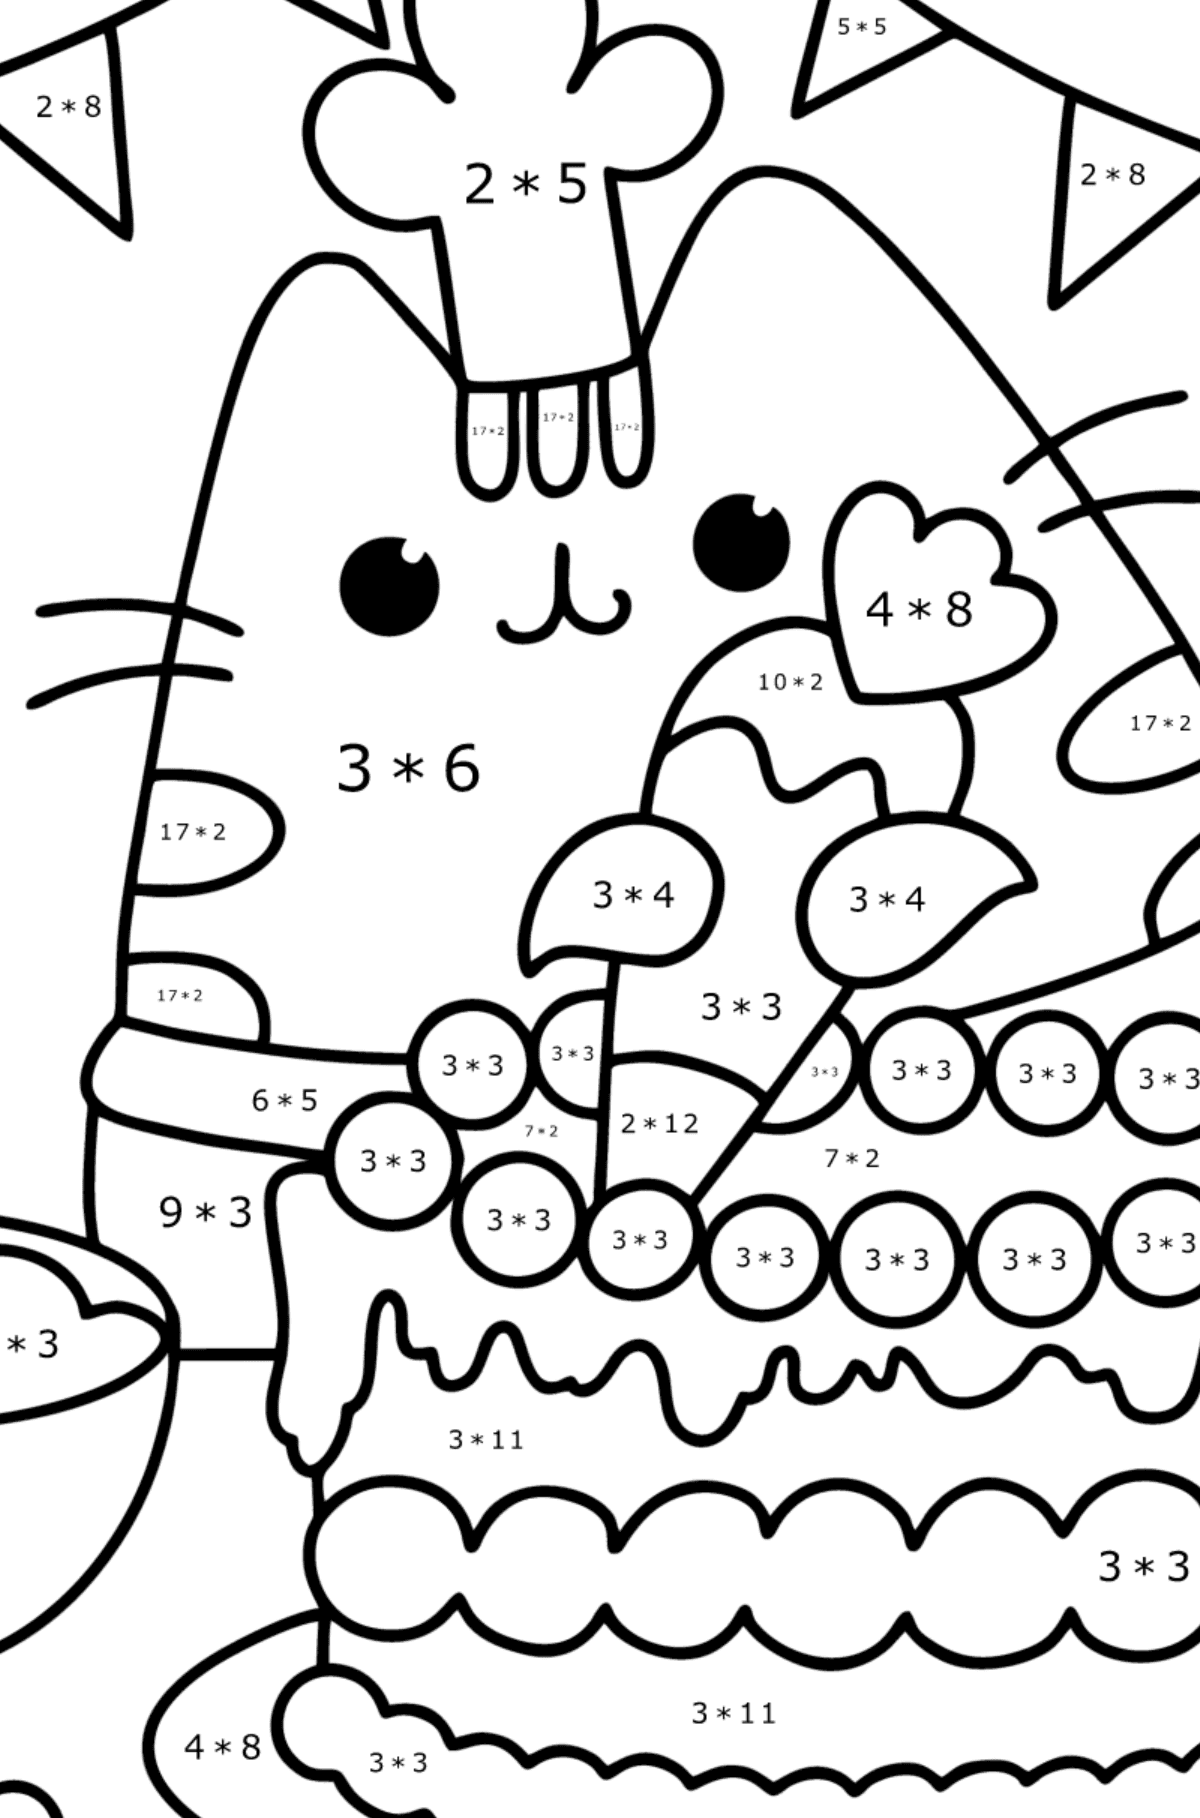 Pusheen birthday сolouring page - Math Coloring - Multiplication for Kids